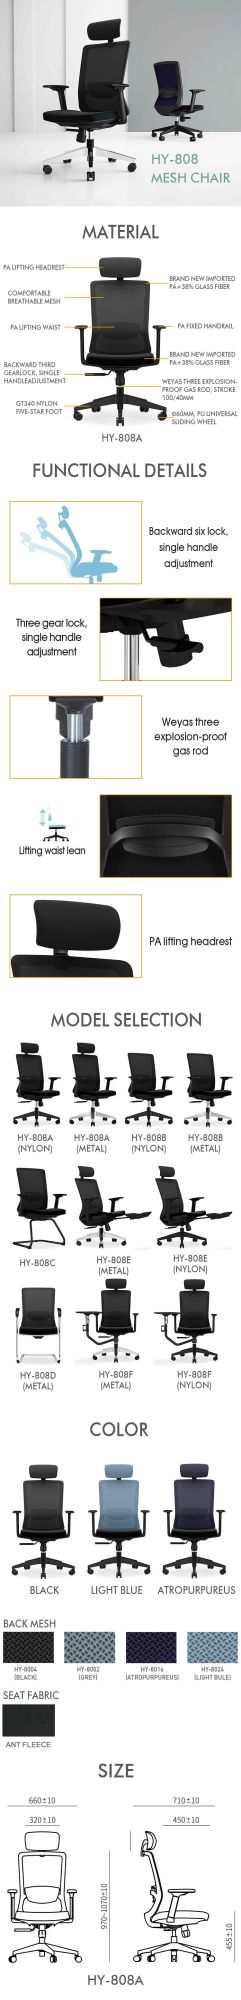 High Back Black Mesh Chair Office Furniture with Adjustable Headrest